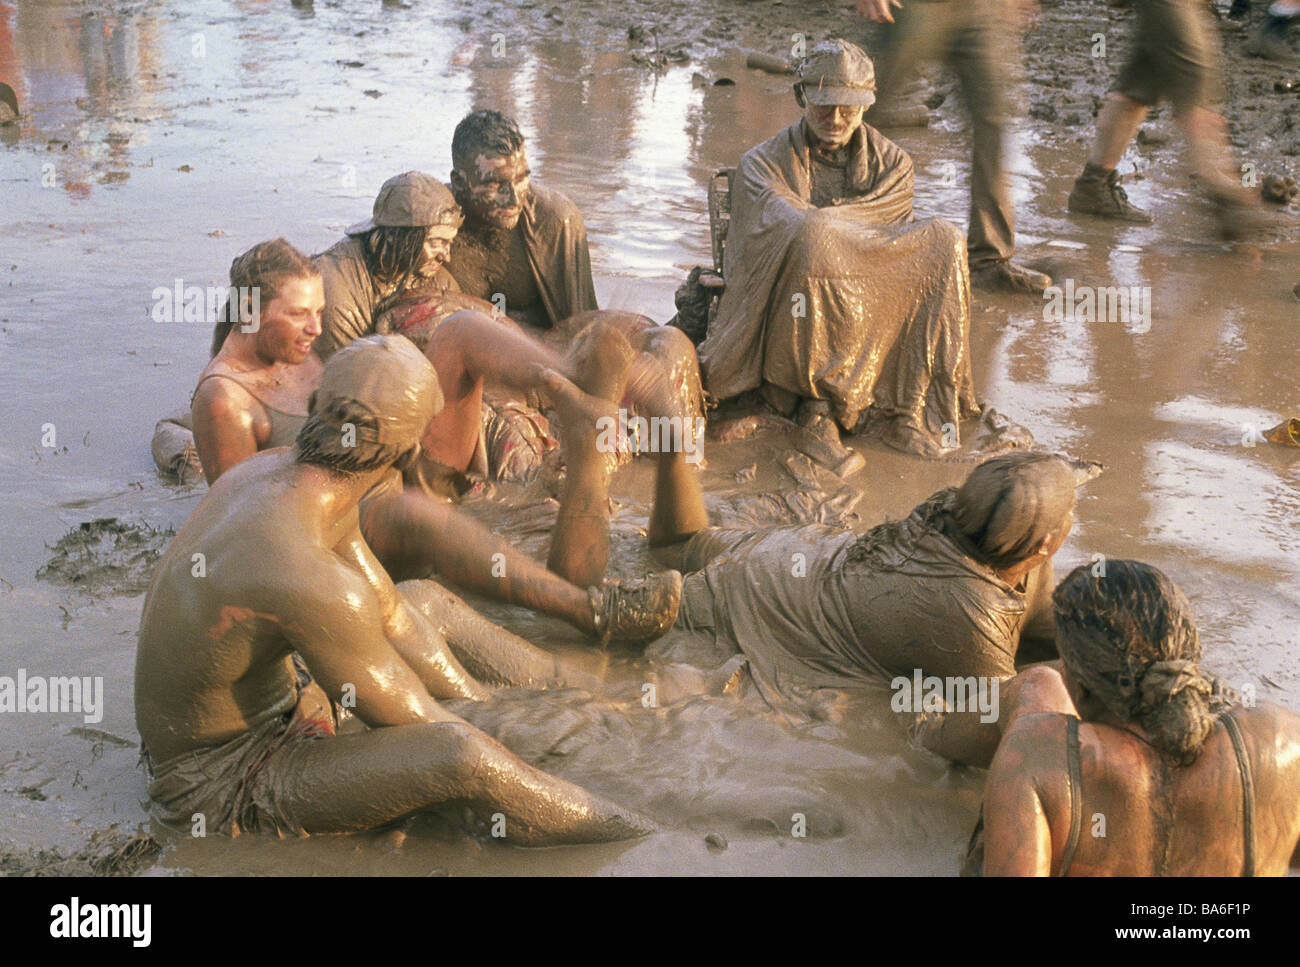 USA Woodstock festival mud people dirty sociability no models release North America party party filth event visitors sits Stock Photo